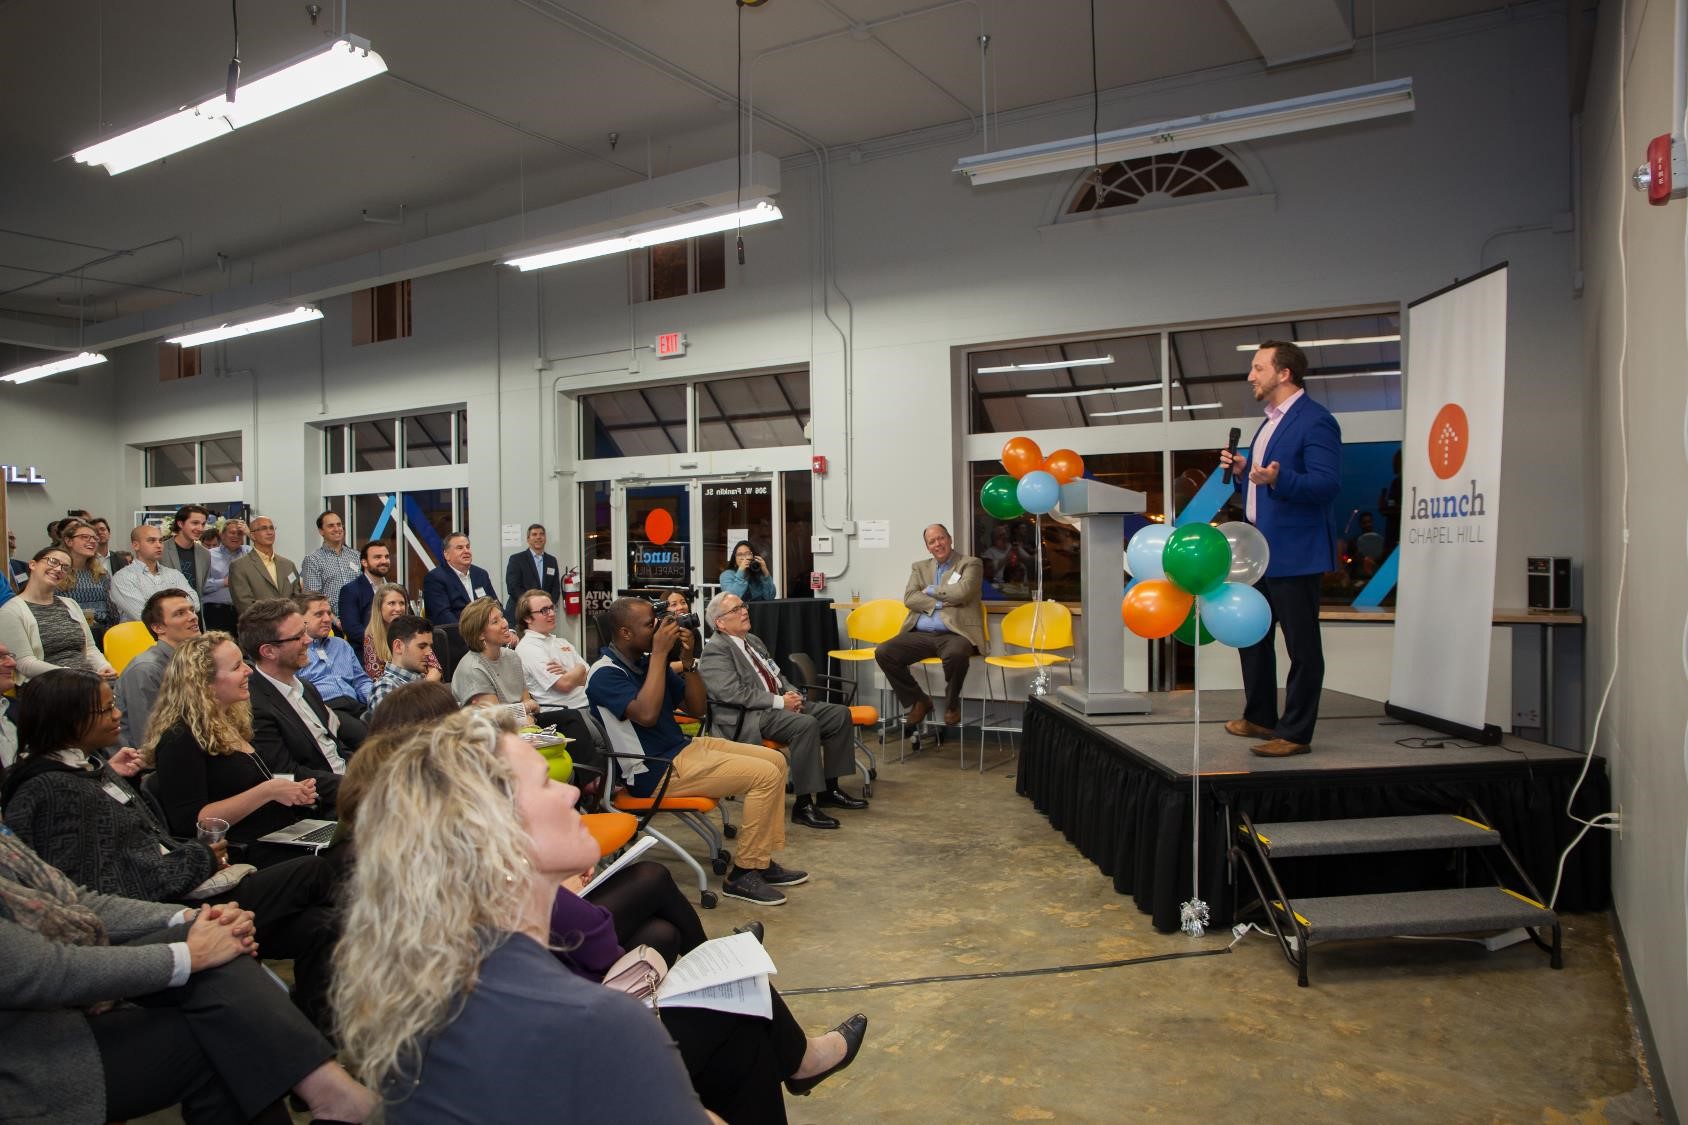 Local officials, university leaders, area entrepreneurs and residents gather for a celebration of Launch Chapel Hill's first five years of supporting startups in Chapel Hill and Orange County.